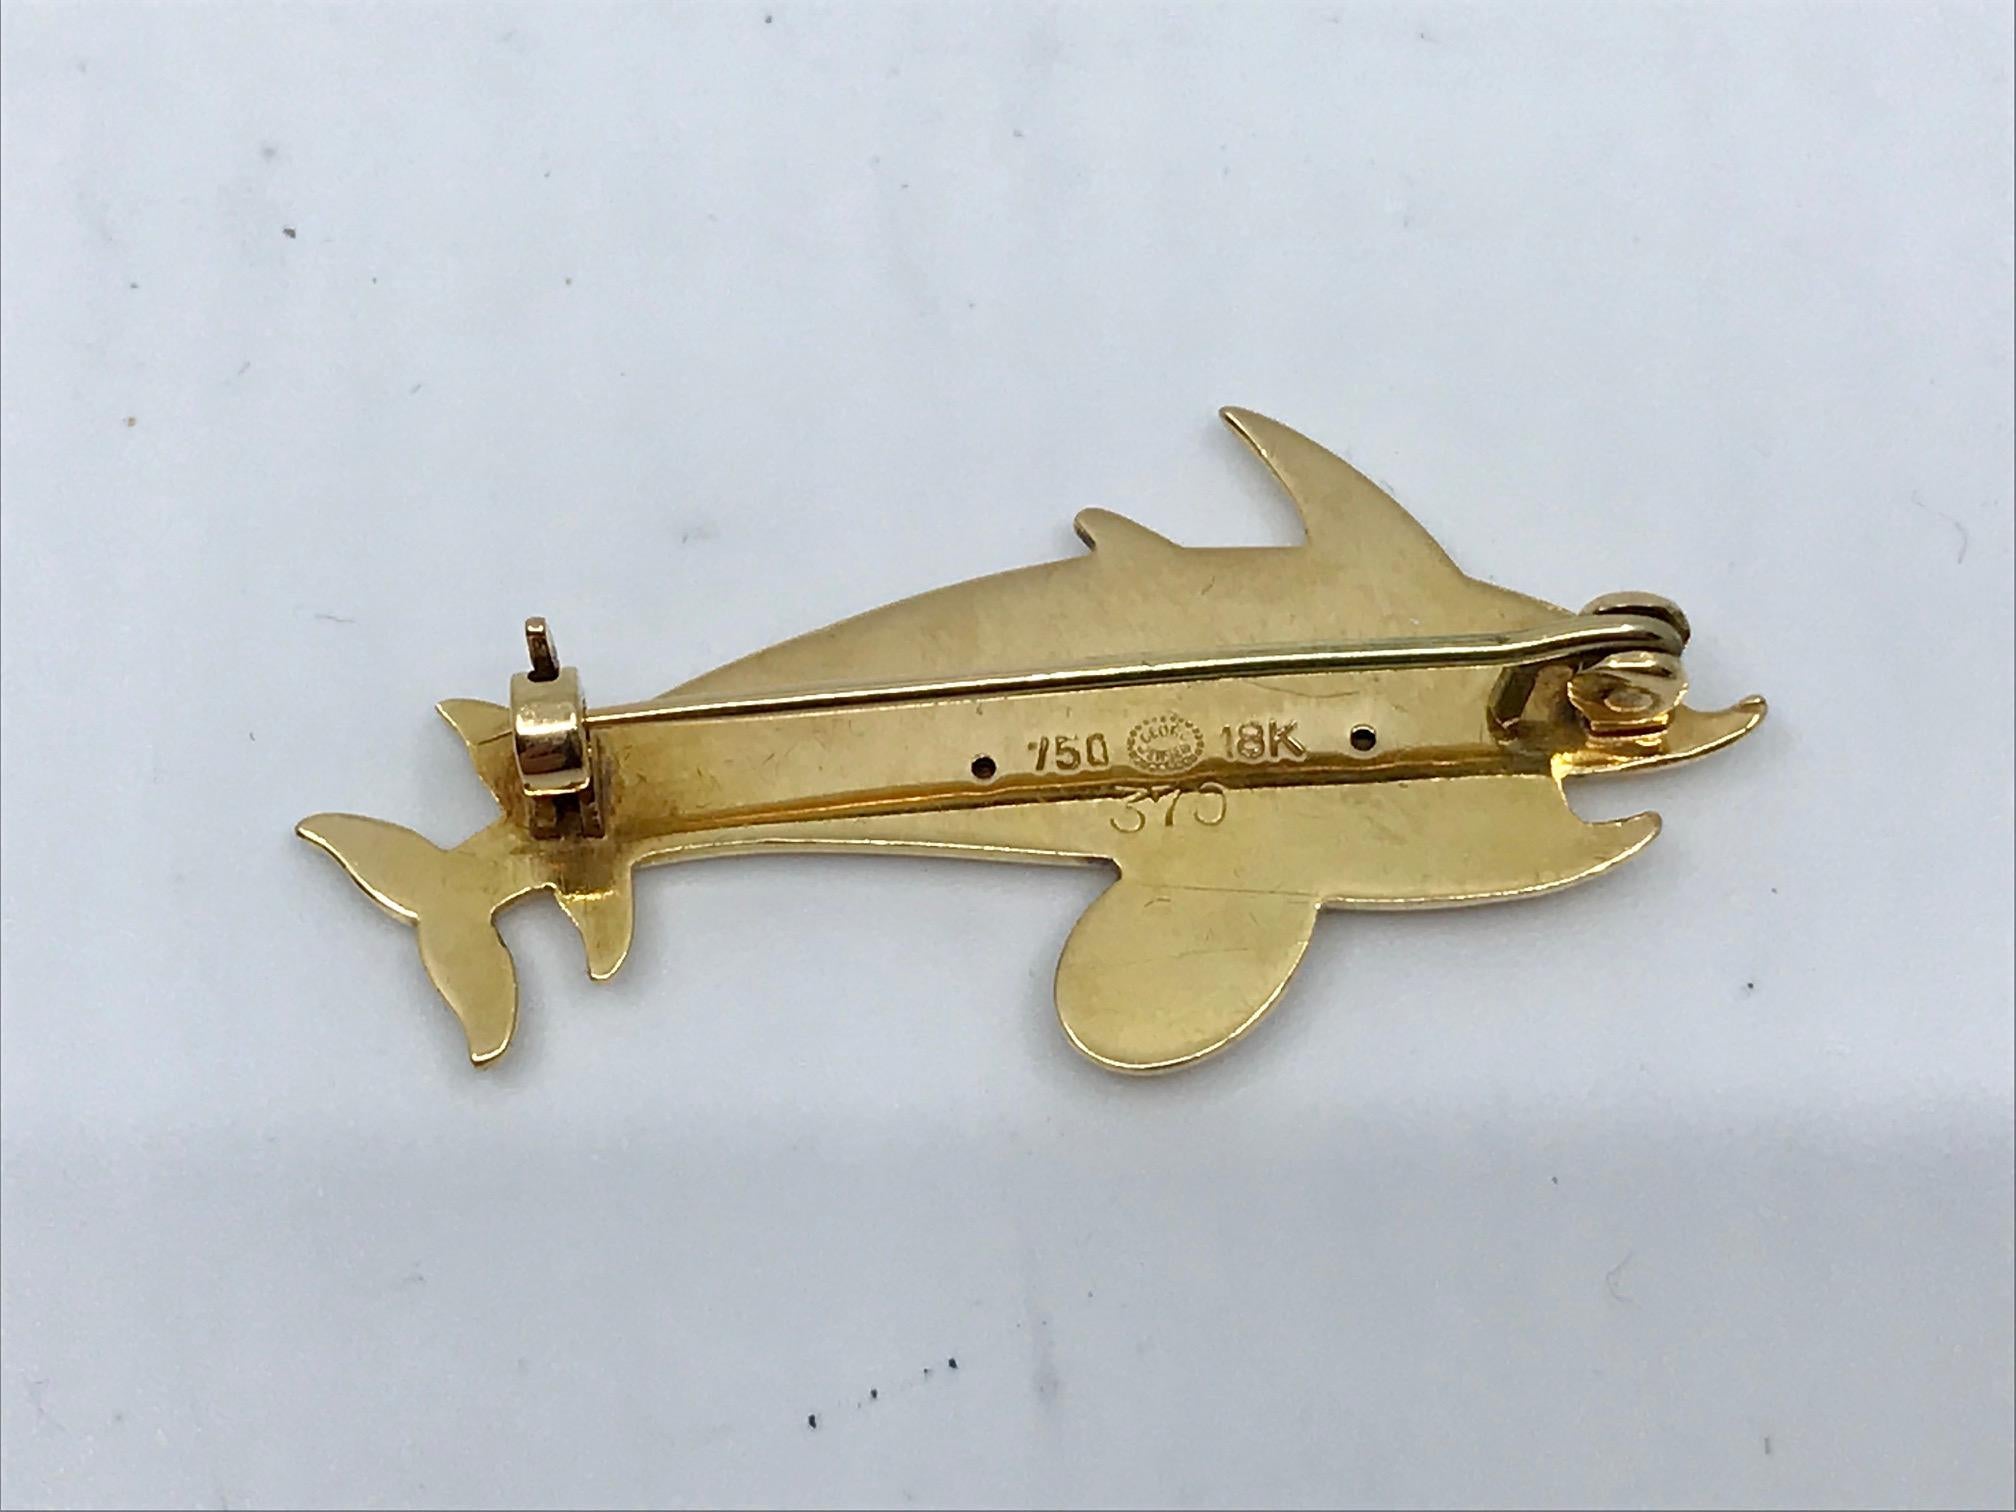 This is an 18kt gold Georg Jensen brooch with dolphin motif, design #370 by Arno Malinowski from circa 1952.

Measures 1 5/8″ x 3/4″ (4cm x 2cm). Georg Jensen changed their numbering system for gold jewelry sometime after the war, this piece is from